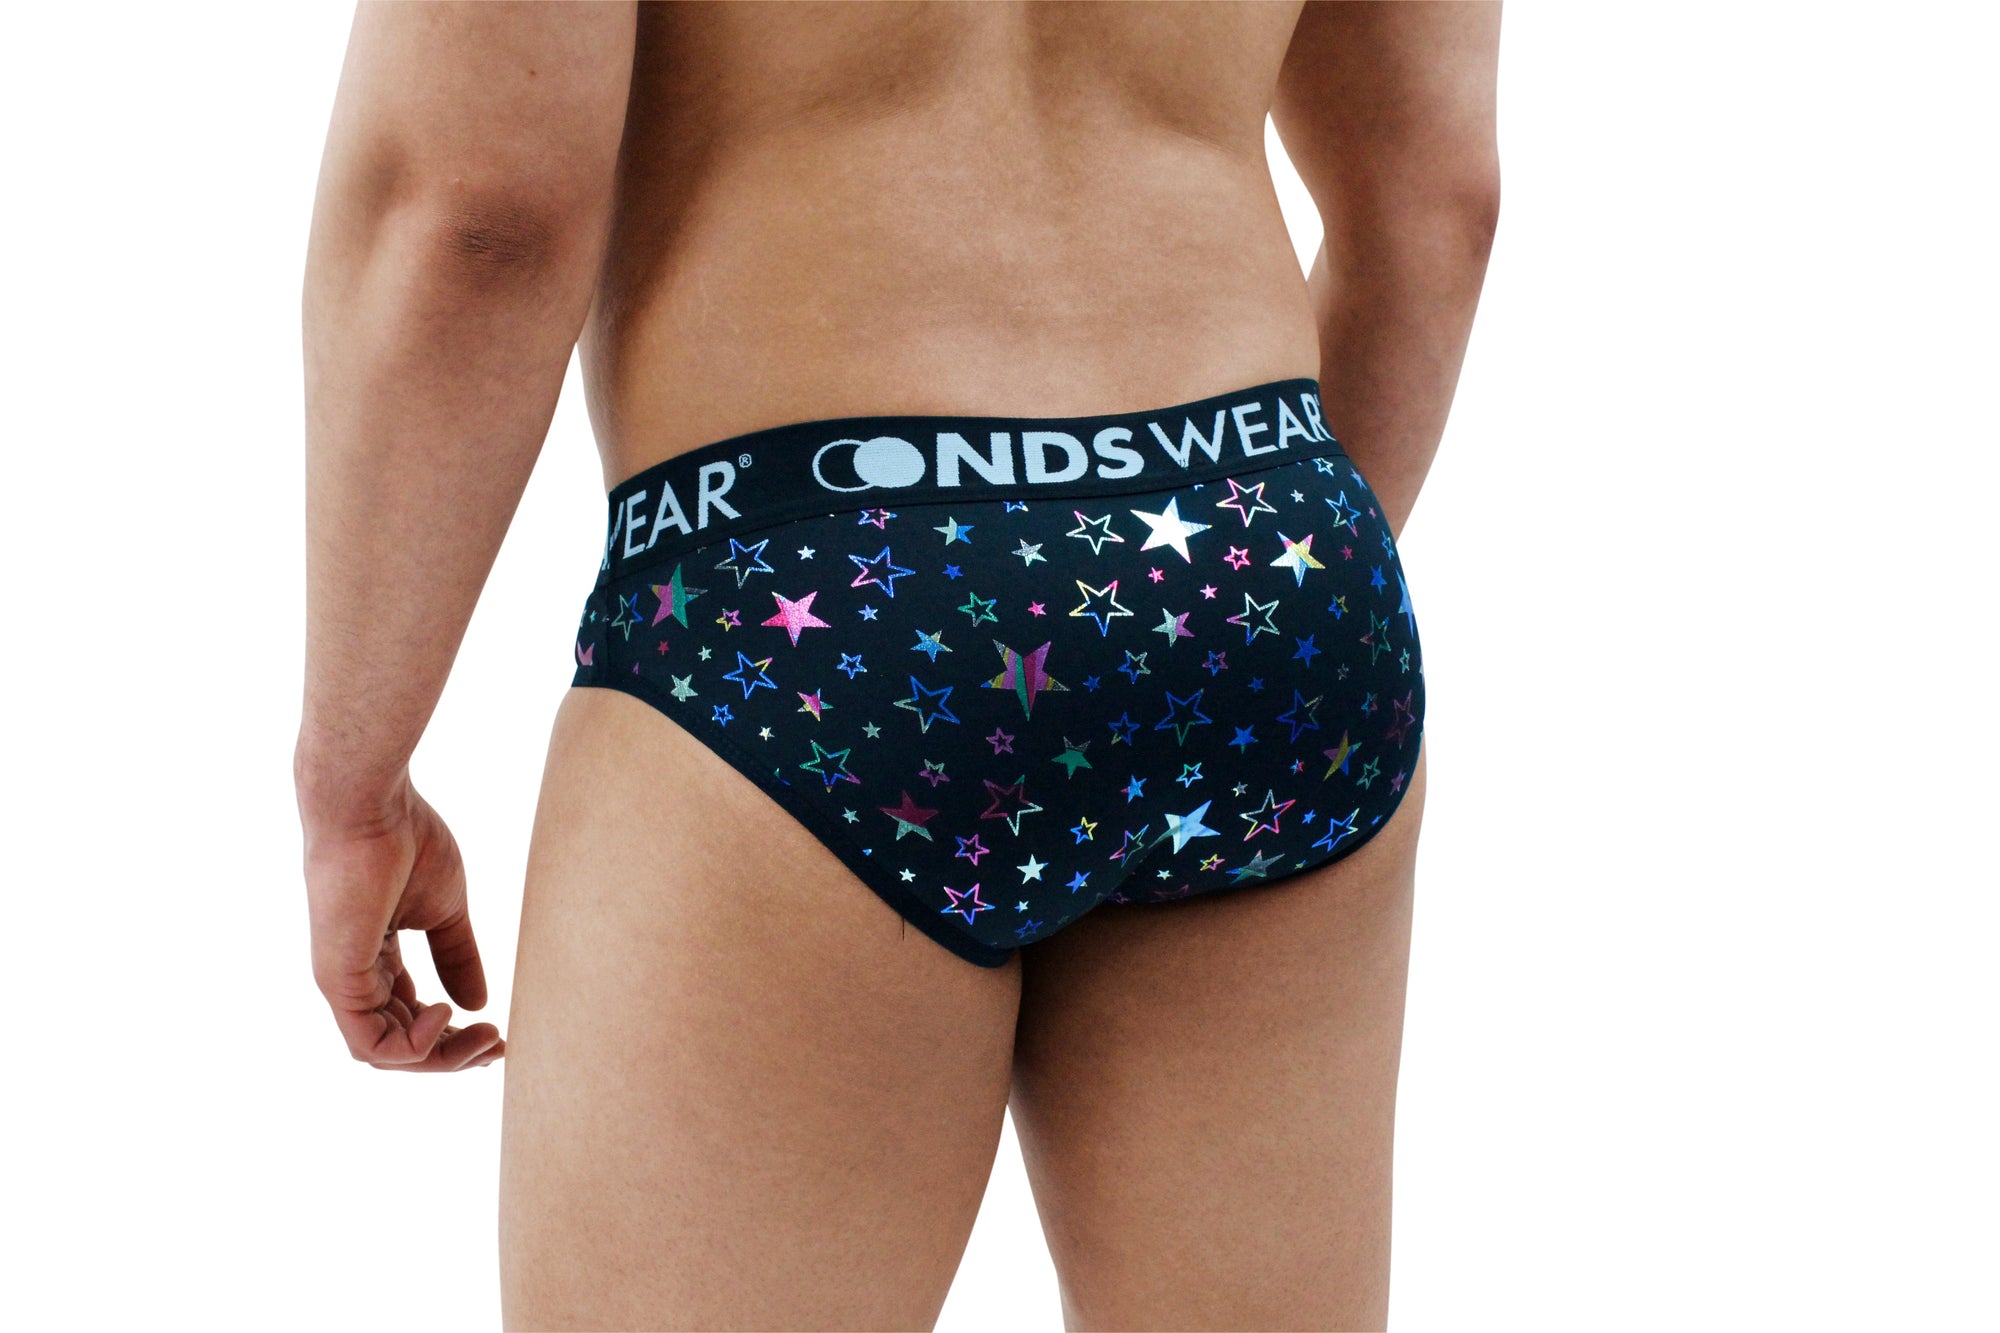 NEW NDS Wear Sparkly Night Mens Boxer Brief - Metallic Stars